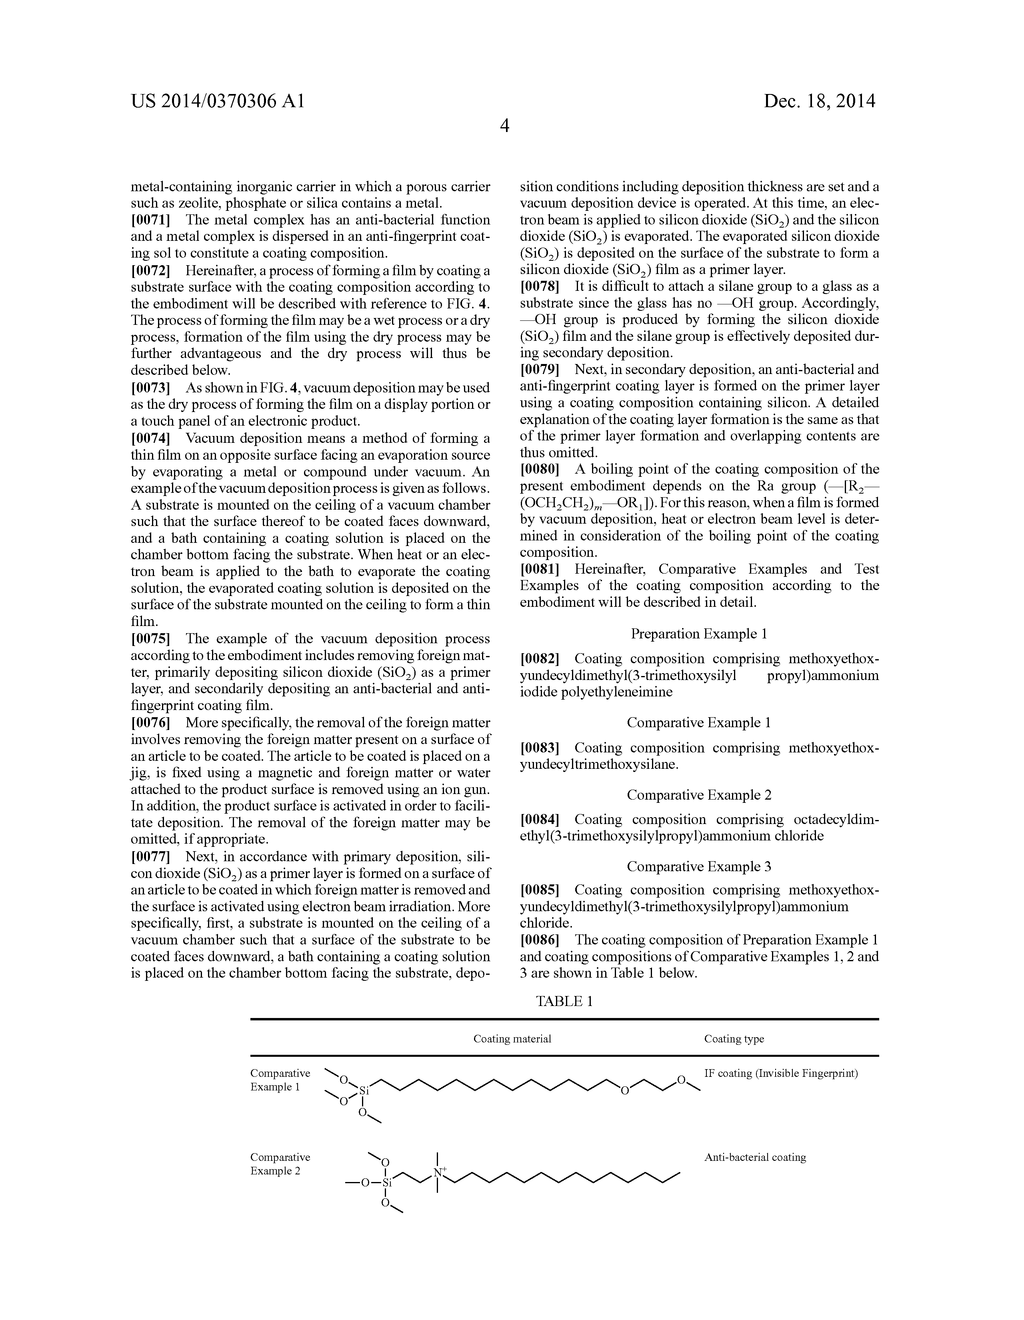 ANTI-BACTERIAL AND ANTI-FINGERPRINT COATING COMPOSITION, FILM COMPRISING     THE SAME, METHOD OF COATING THE SAME AND ARTICLE COATED WITH THE SAME - diagram, schematic, and image 14